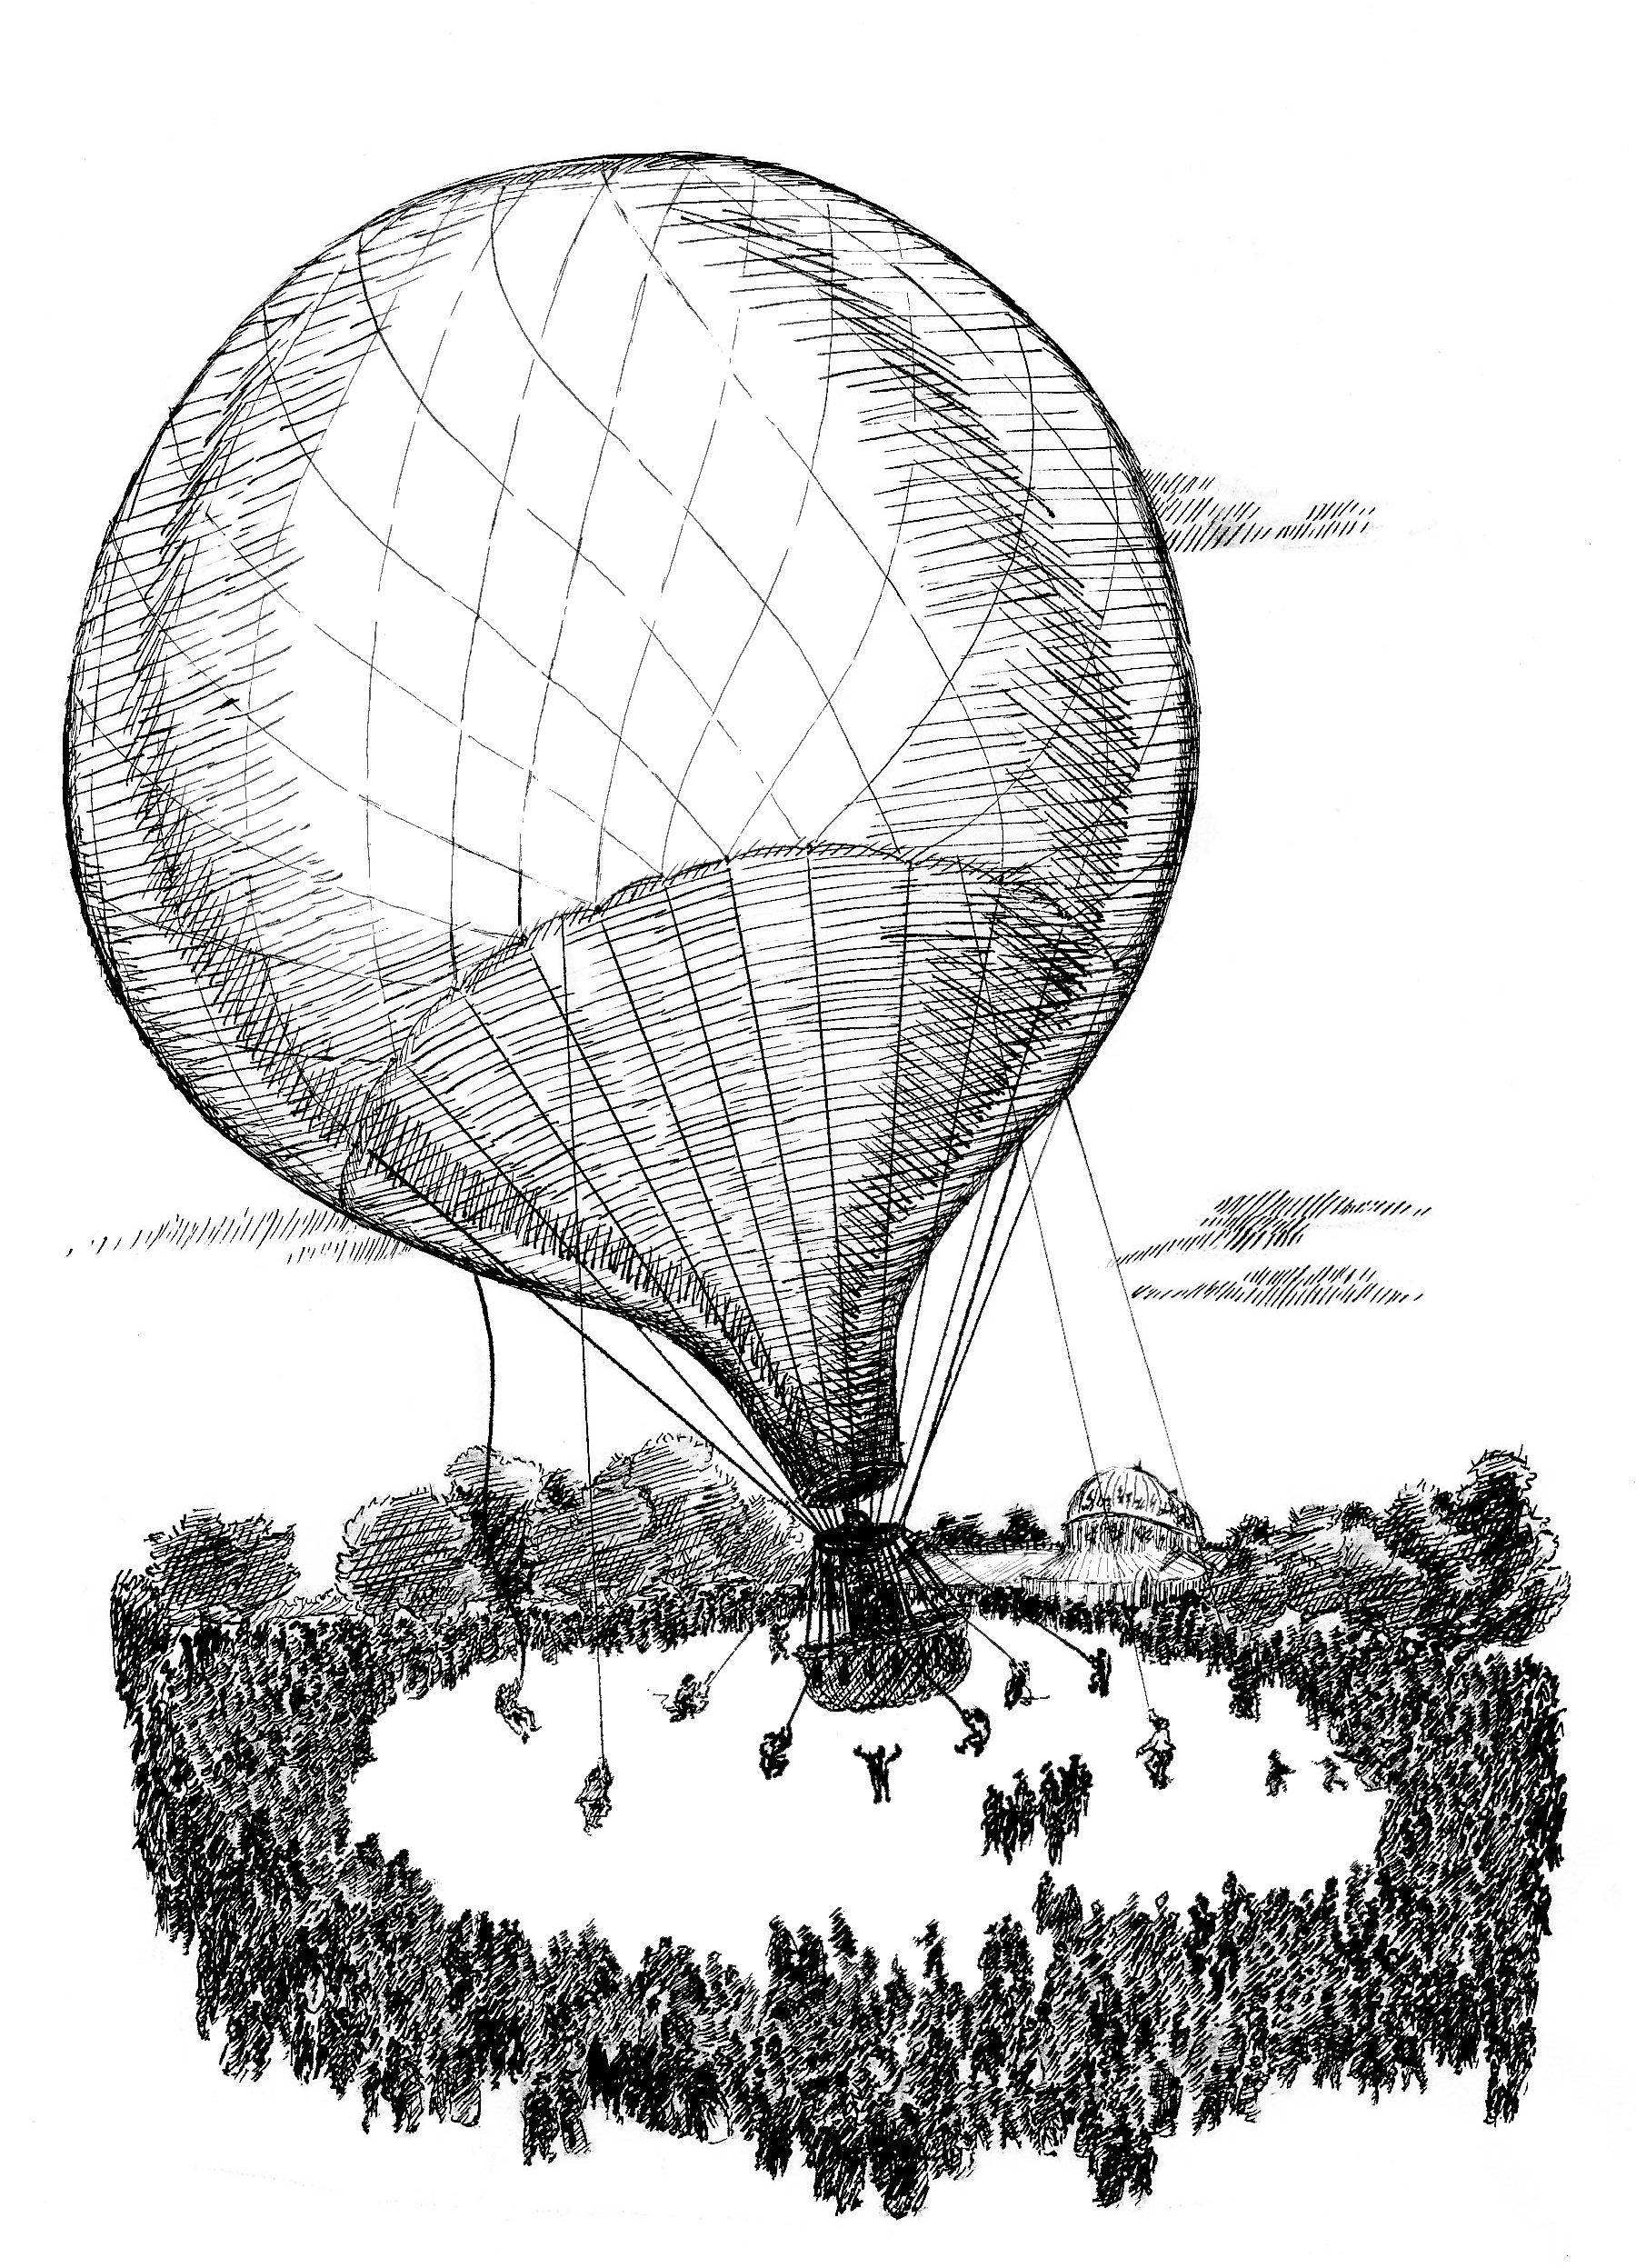 A pen and ink illustration of a Victorian hot air balloon taking off, surrounded by a large crowd.